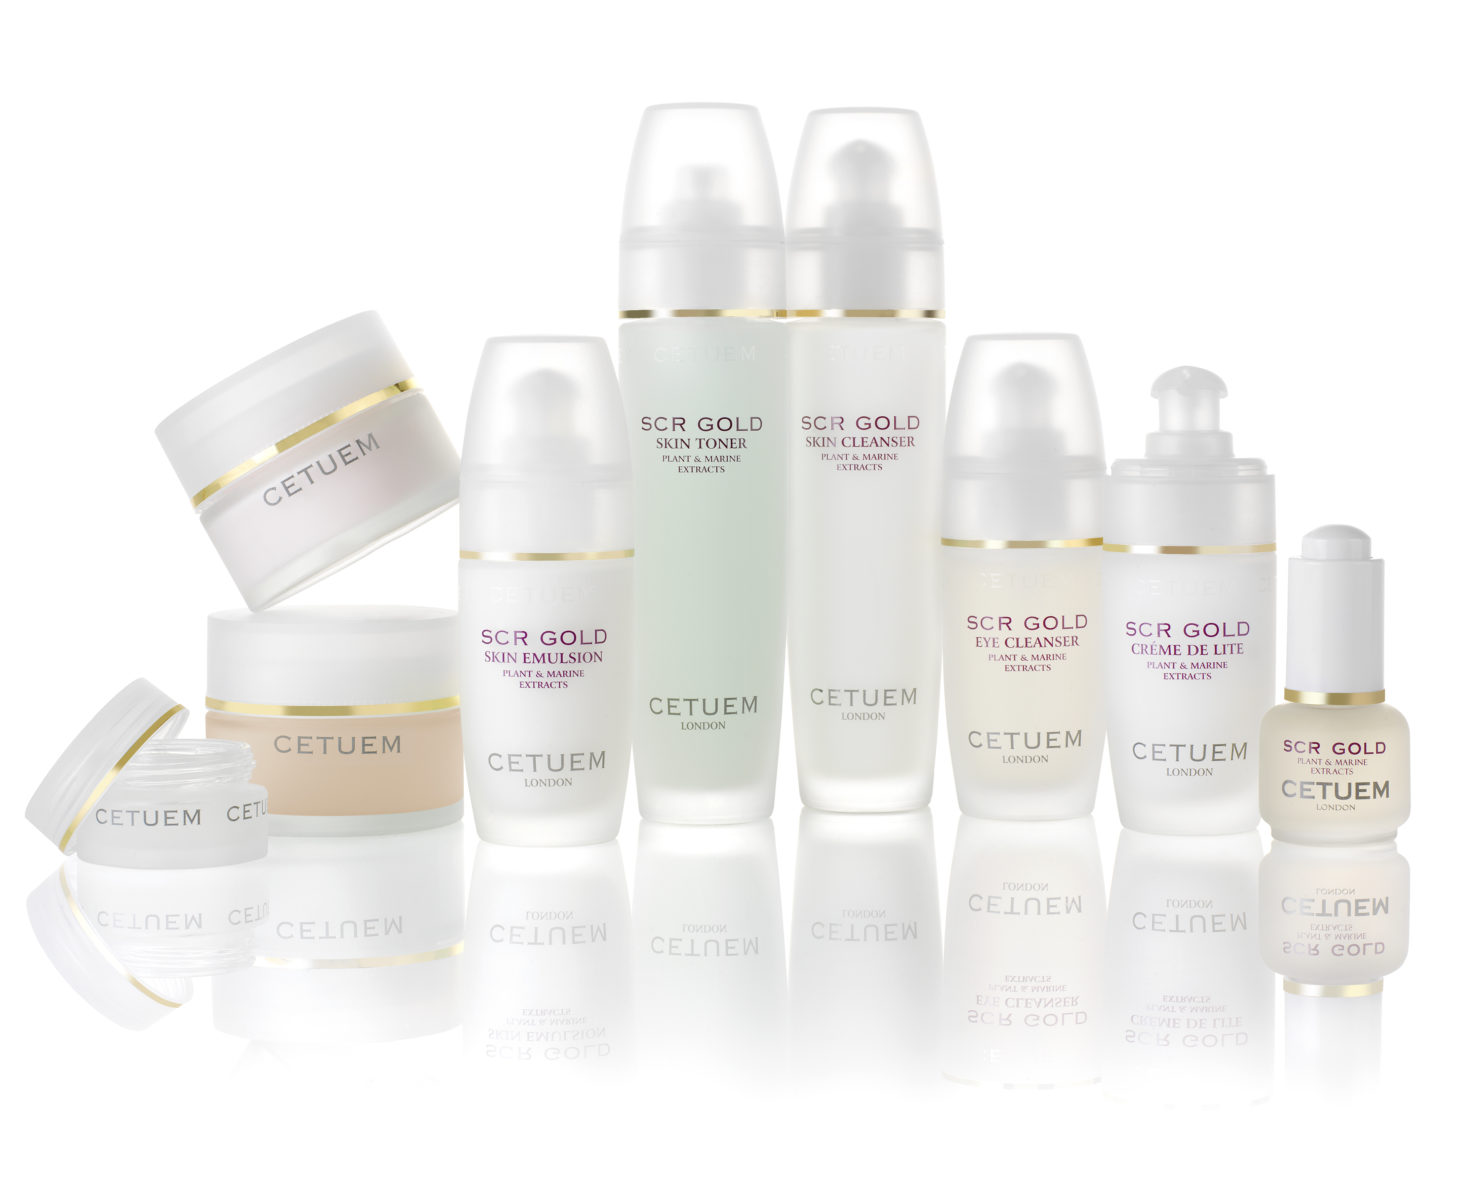 LUXURIA LIFESTYLE WELCOMES CETUEM SKINCARE